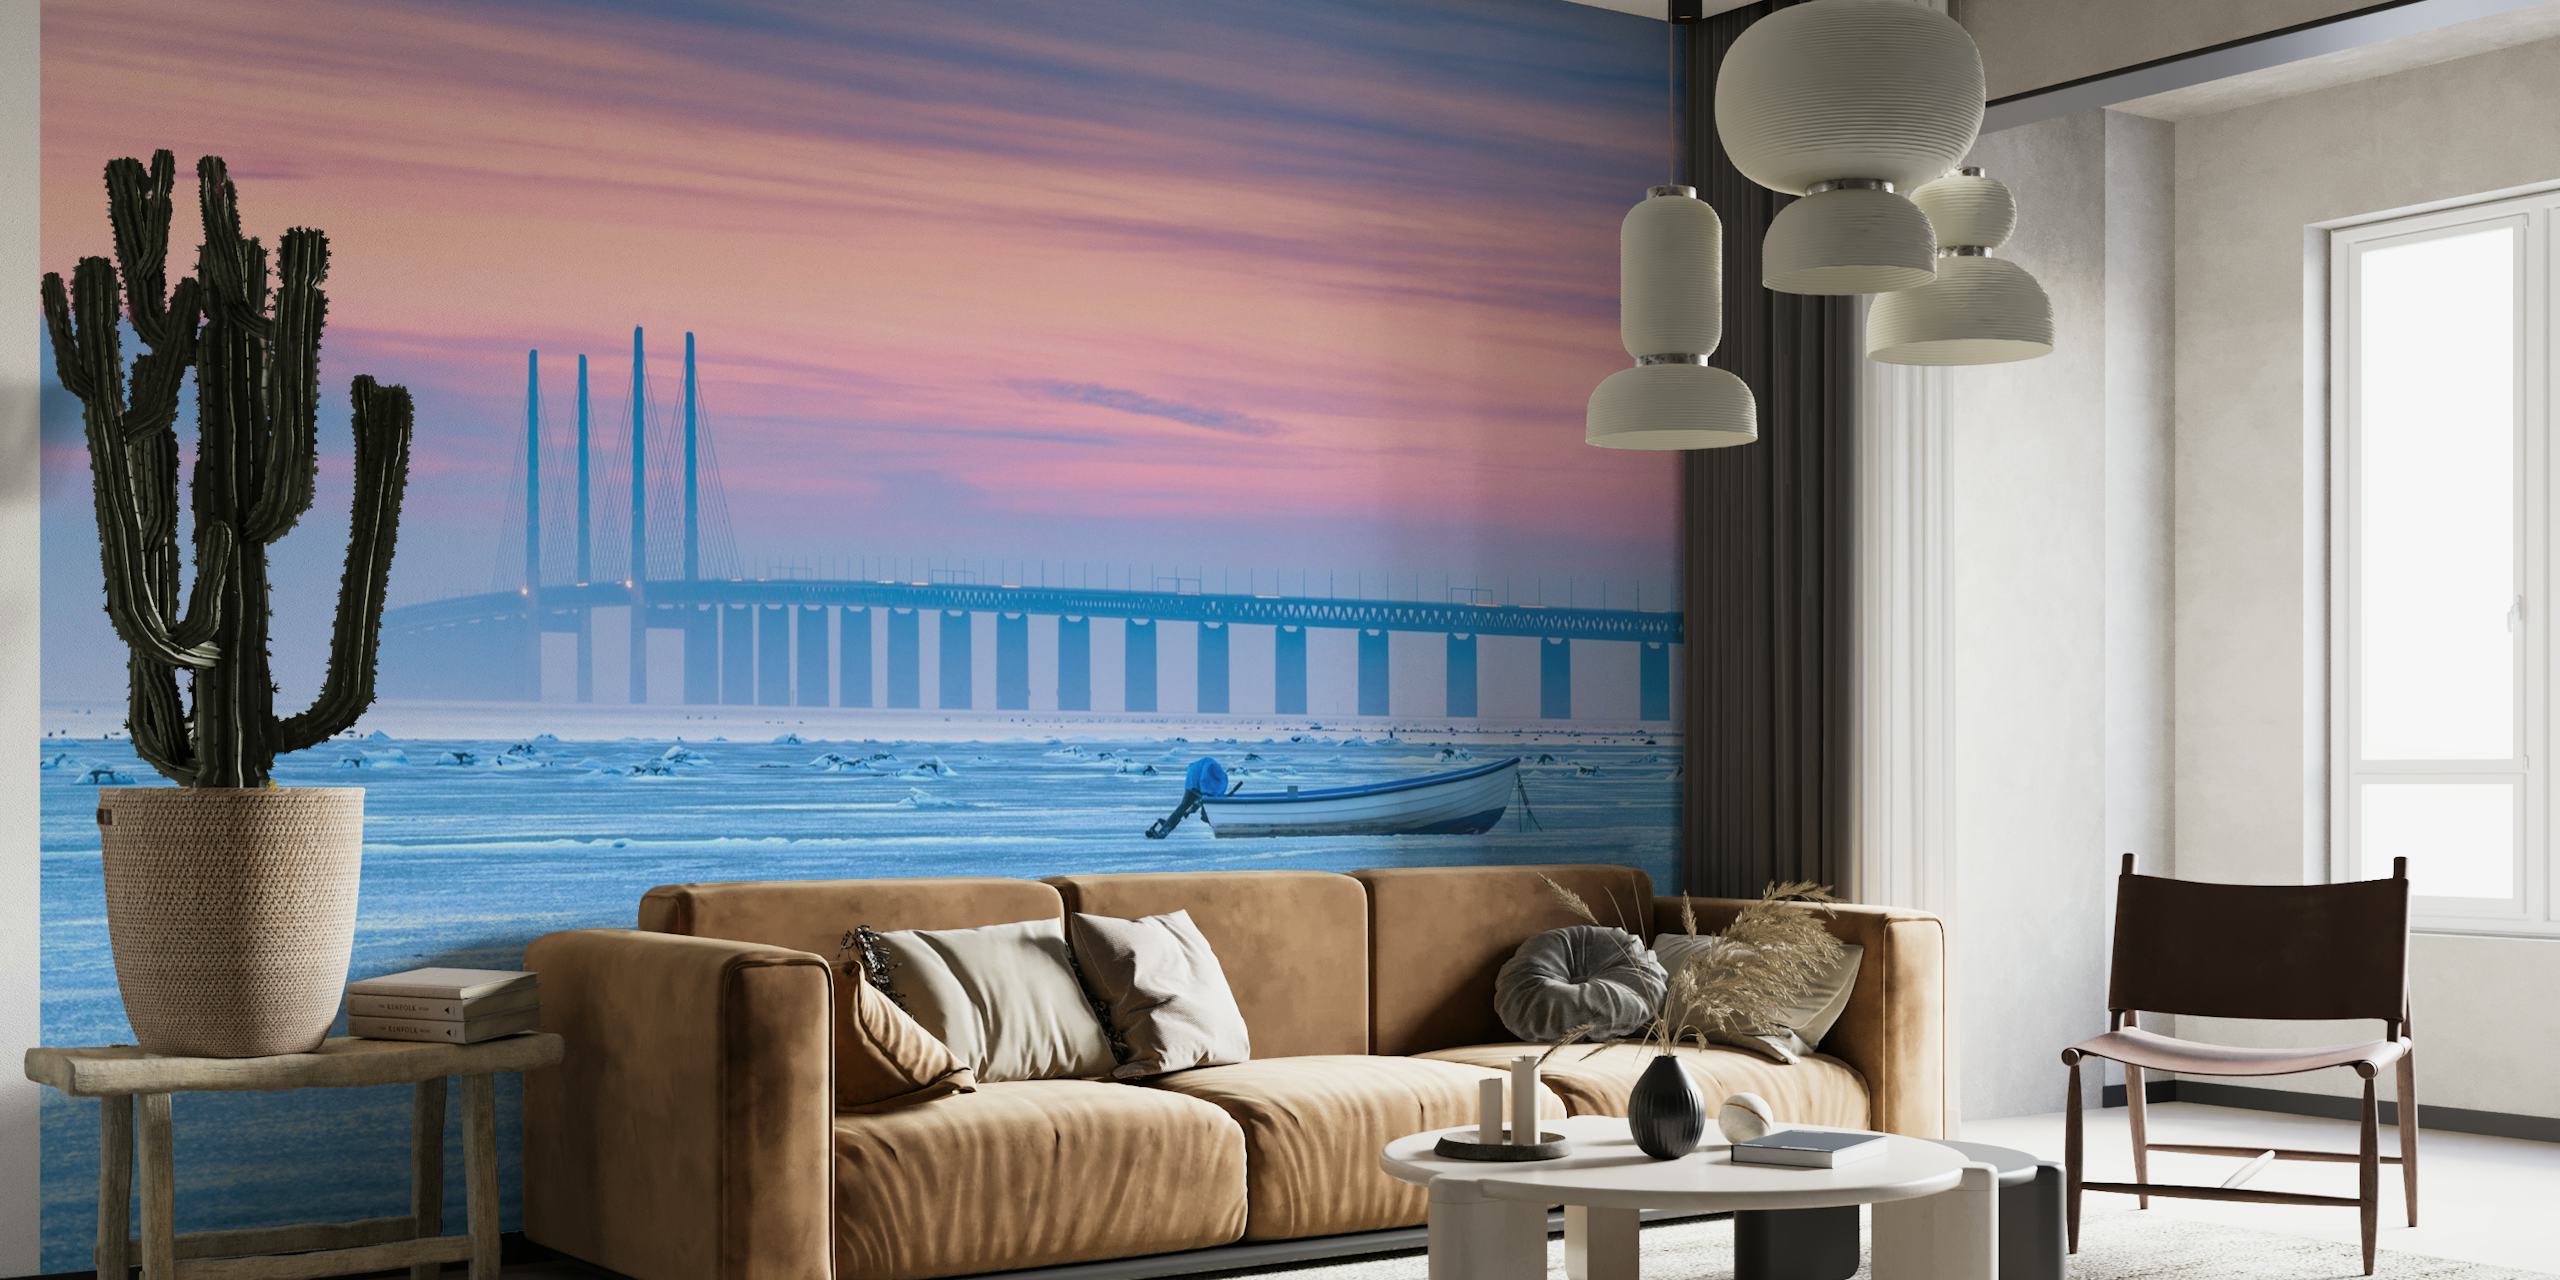 A wall mural depicting a frozen sea with a calm pastel sky, distant bridge, and a lone boat